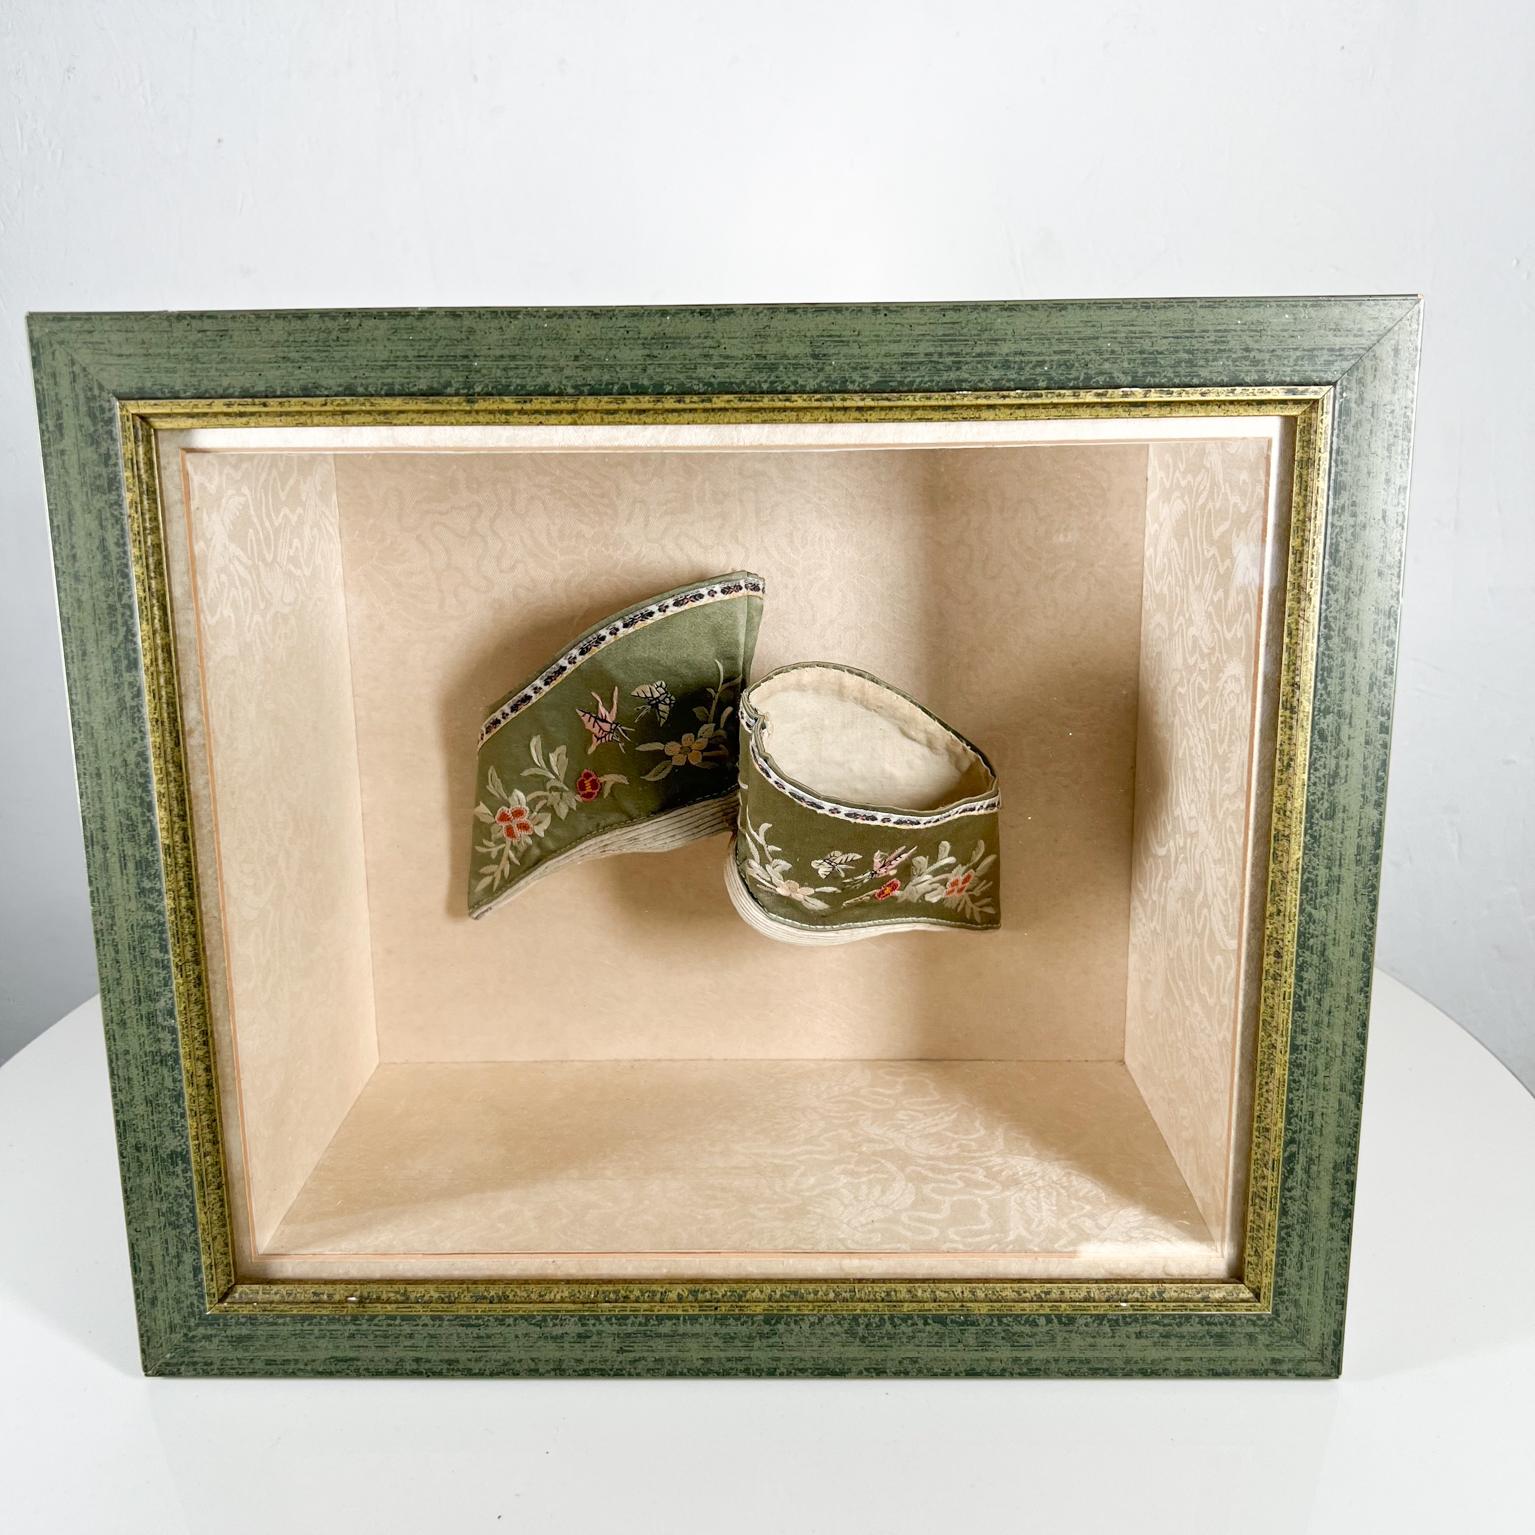 Antique Chinese green silk embroidered bound feet bind lotus shoes in shadow box
Green floral
13.63 w x 11.75 h x 6 d
Original unrestored antique vintage condition.
See images provided please.